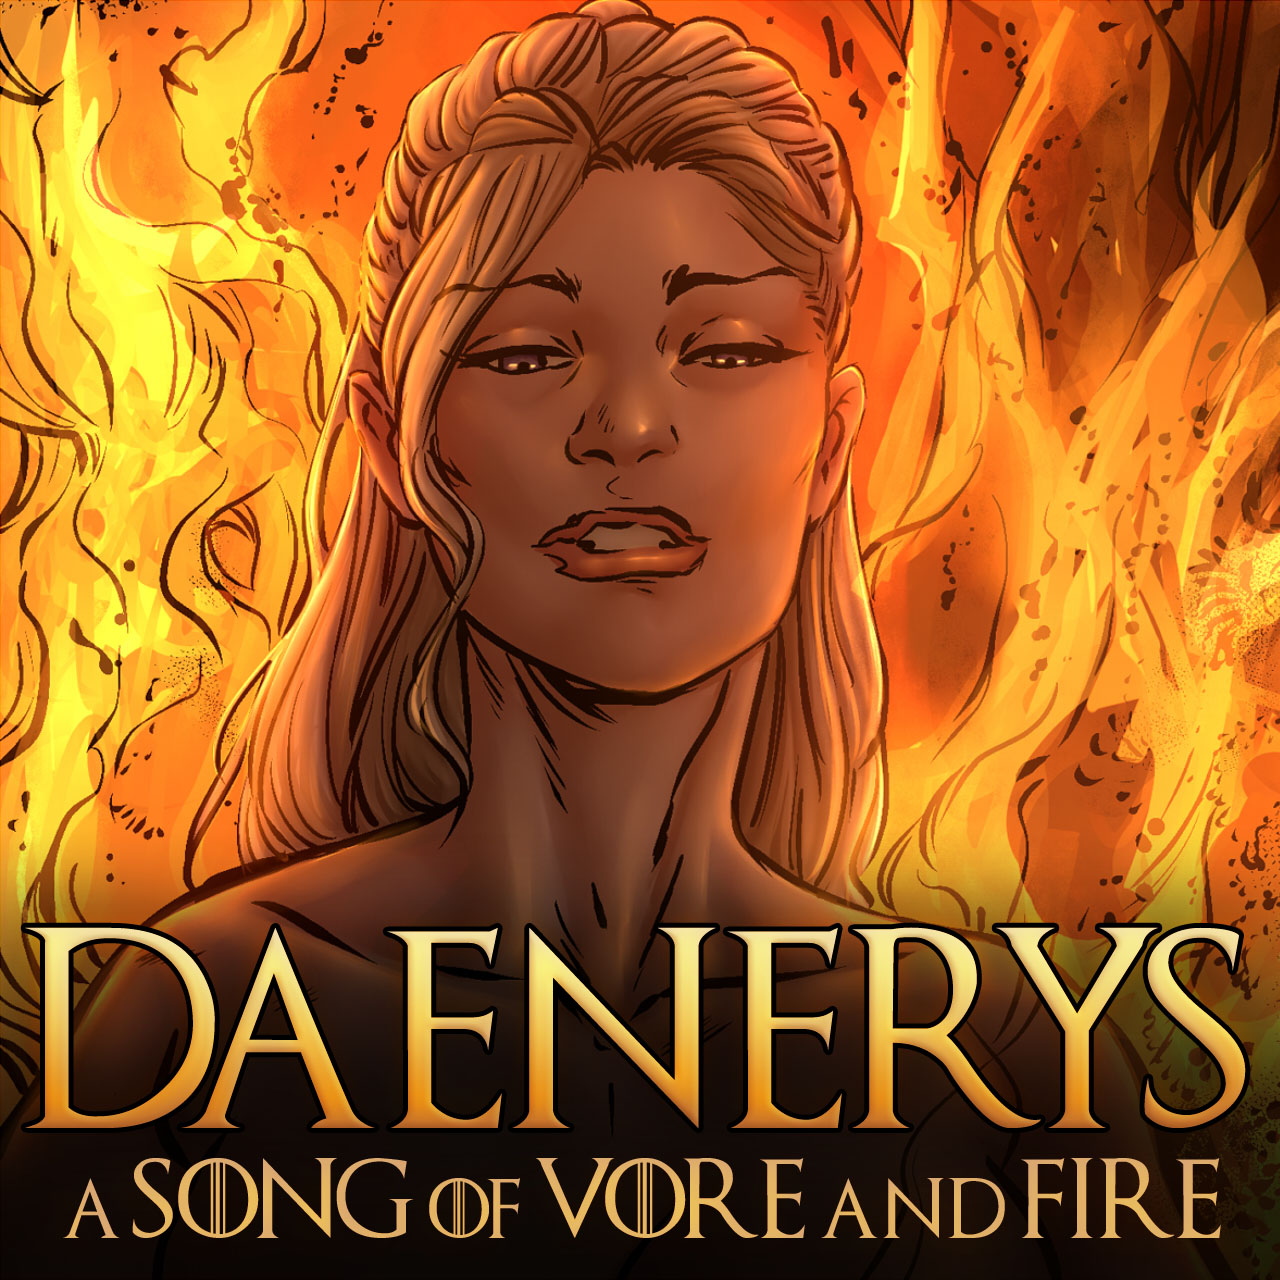 Daenerys: A Song of Vore and Fire